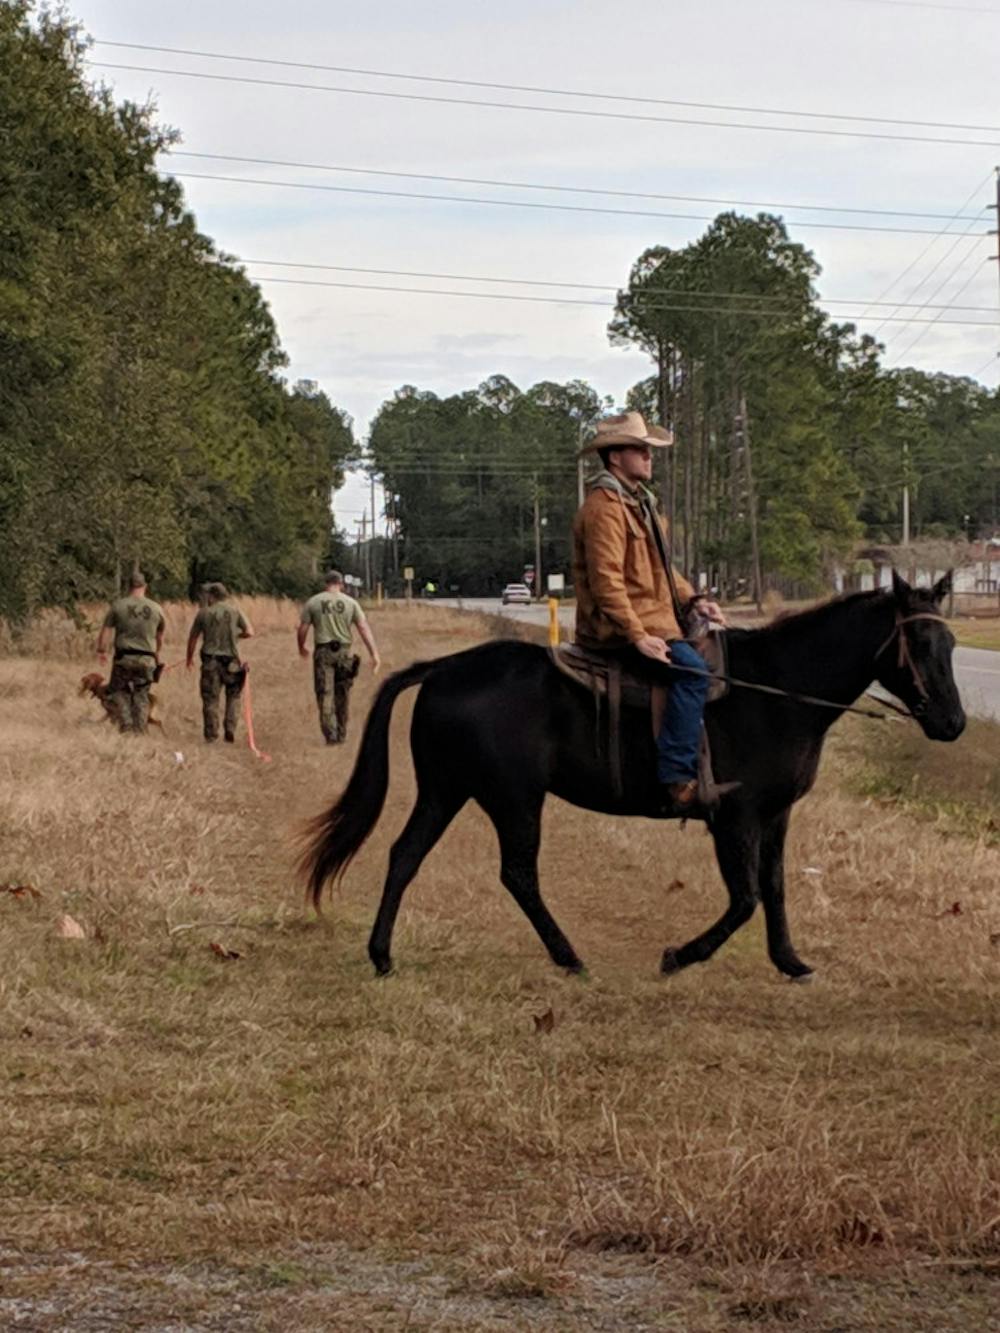 <p dir="ltr"><span>Volunteers on horseback aided officers on foot in the search through the wooded area near Grace Marketplace, at 3055 NE 28th Drive. The search lasted roughly 4 and a half hours. Courtesy to The Alligator.</span></p><p><span> </span></p>